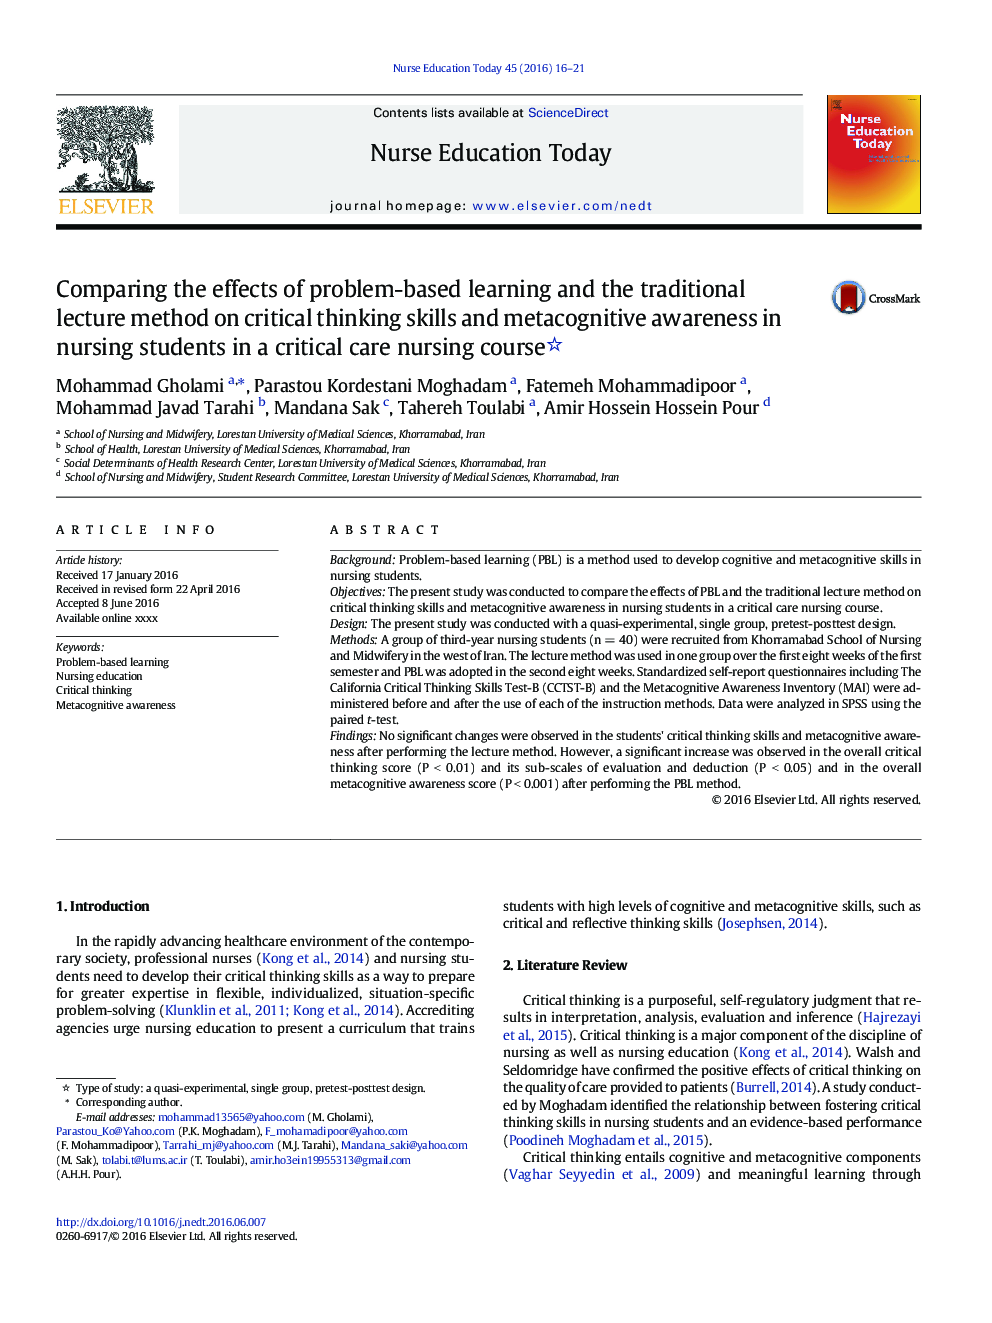 Comparing the effects of problem-based learning and the traditional lecture method on critical thinking skills and metacognitive awareness in nursing students in a critical care nursing course 